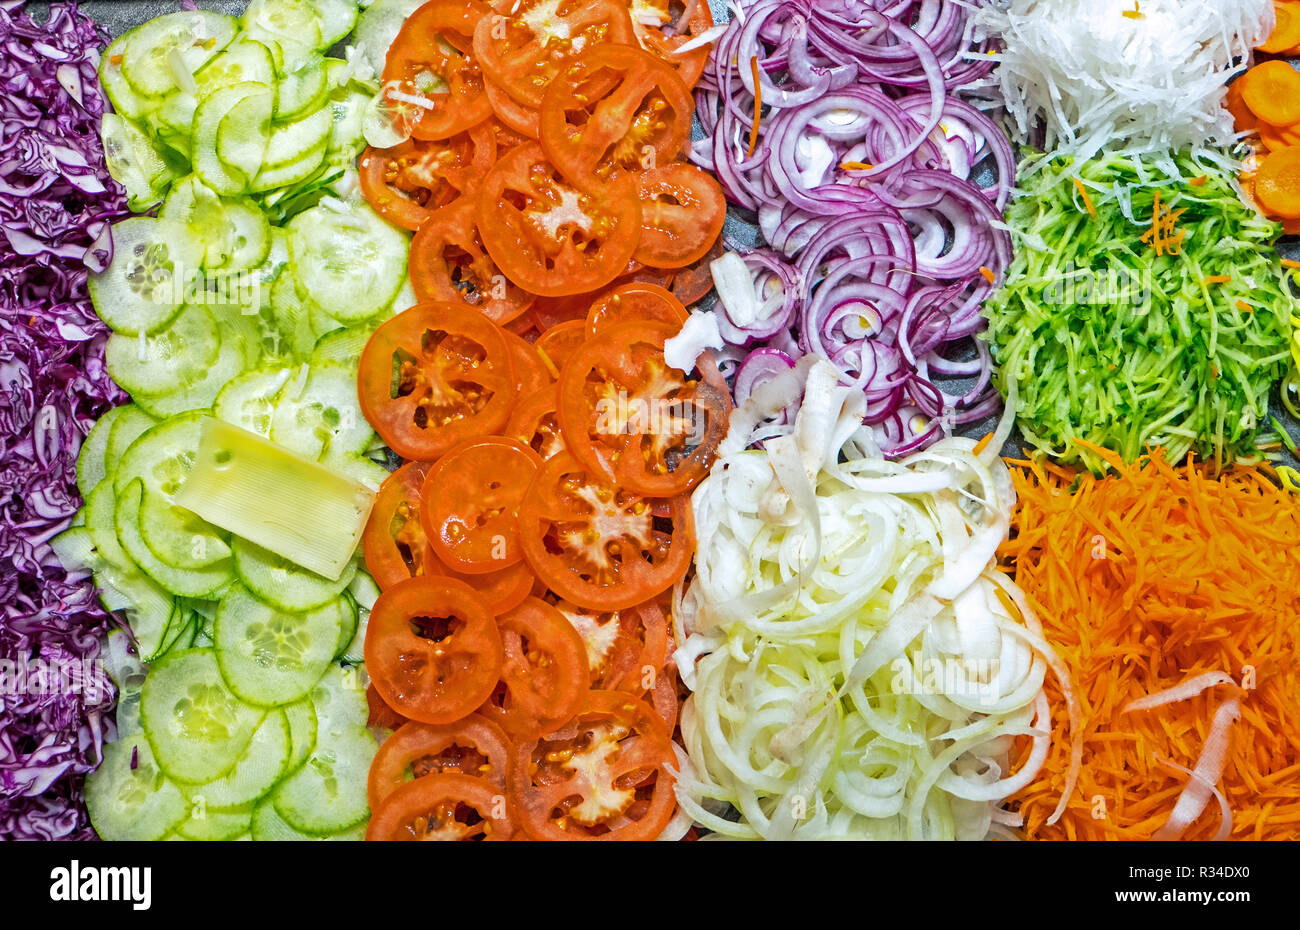 colourful salad buffet in a restaurant Stock Photo